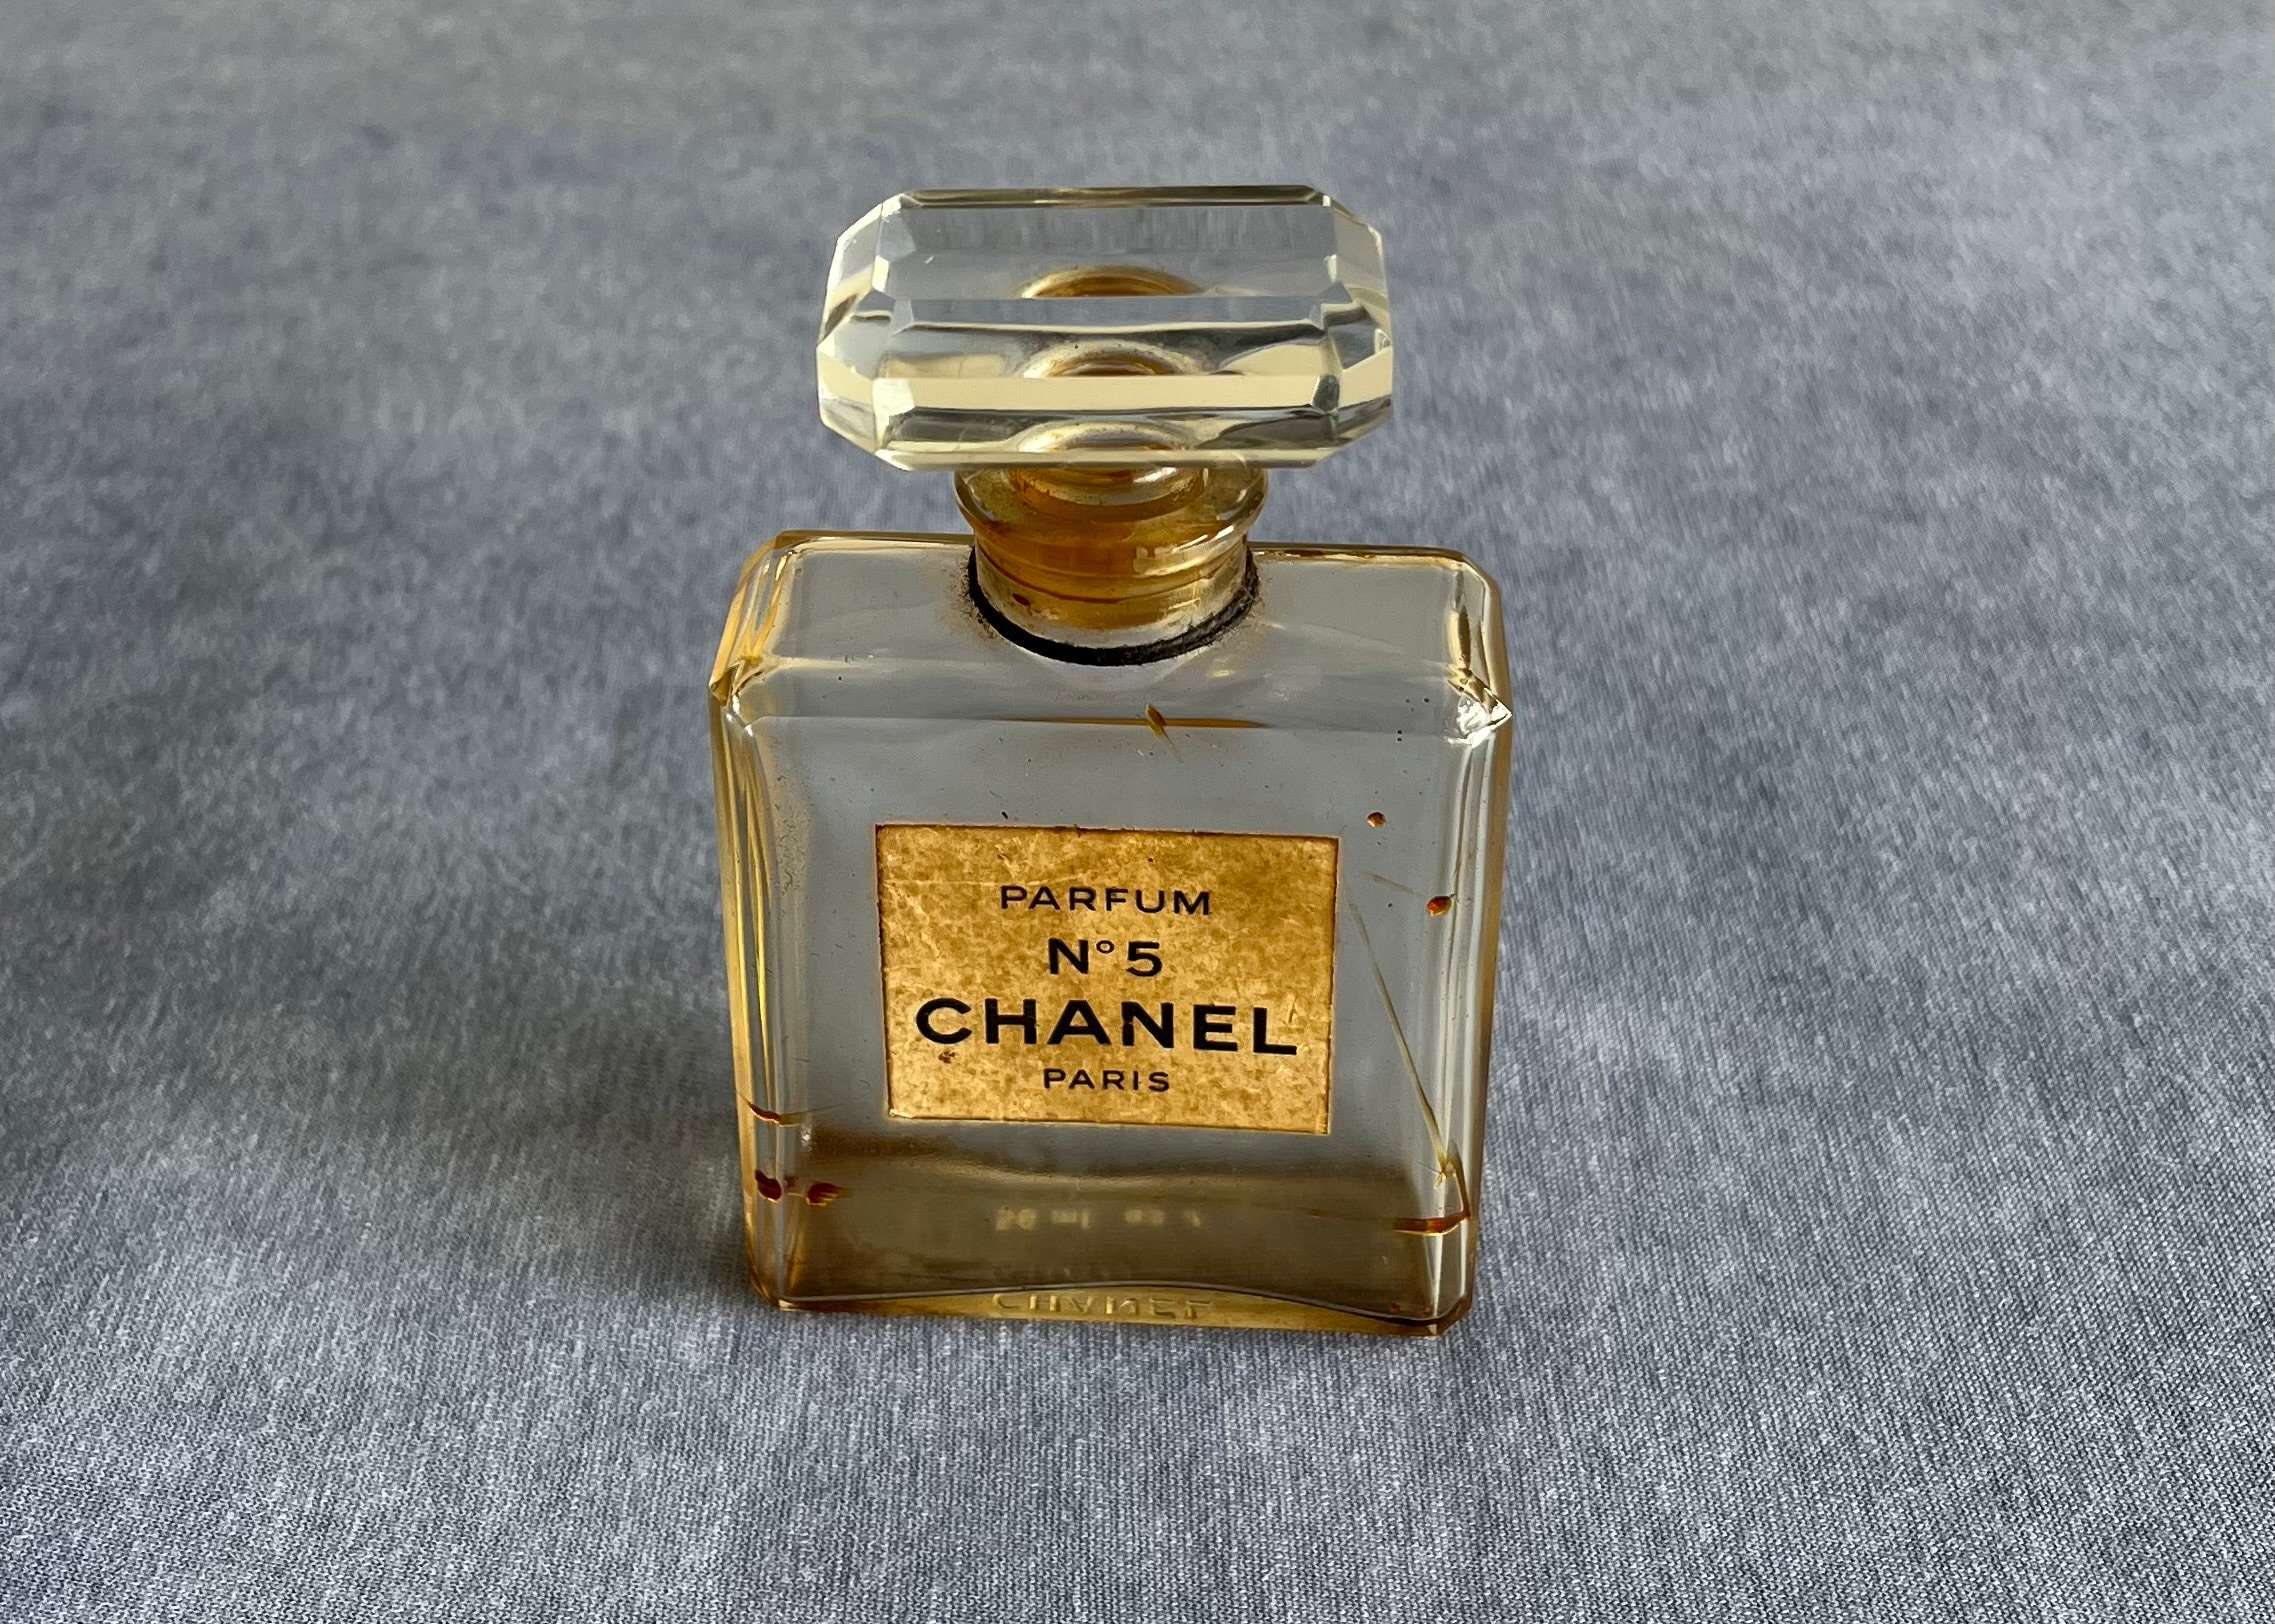 Buy Chanel No 5 Bottle Online In India -  India